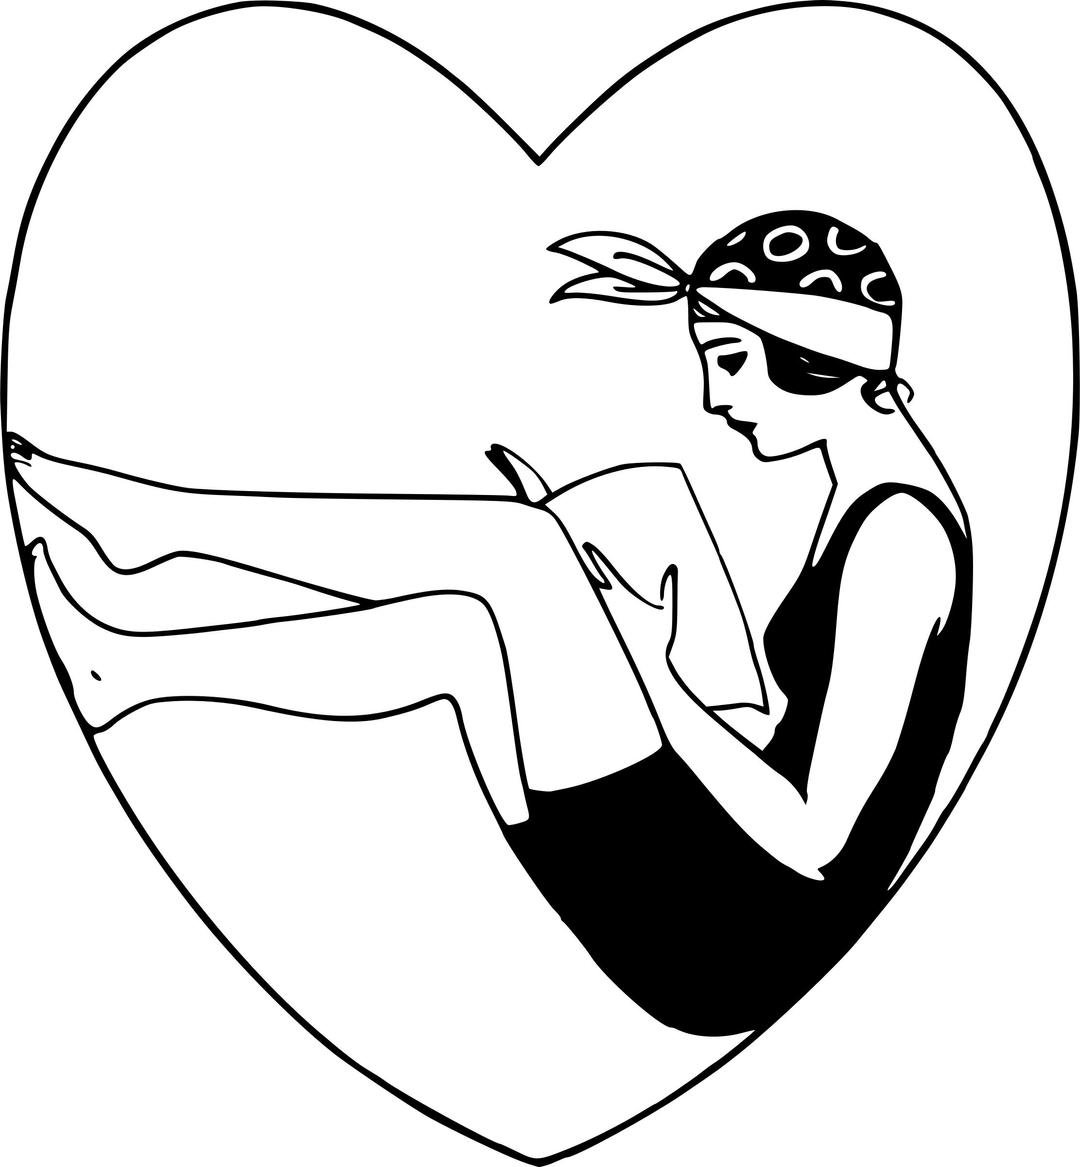 Lady in a Heart png transparent